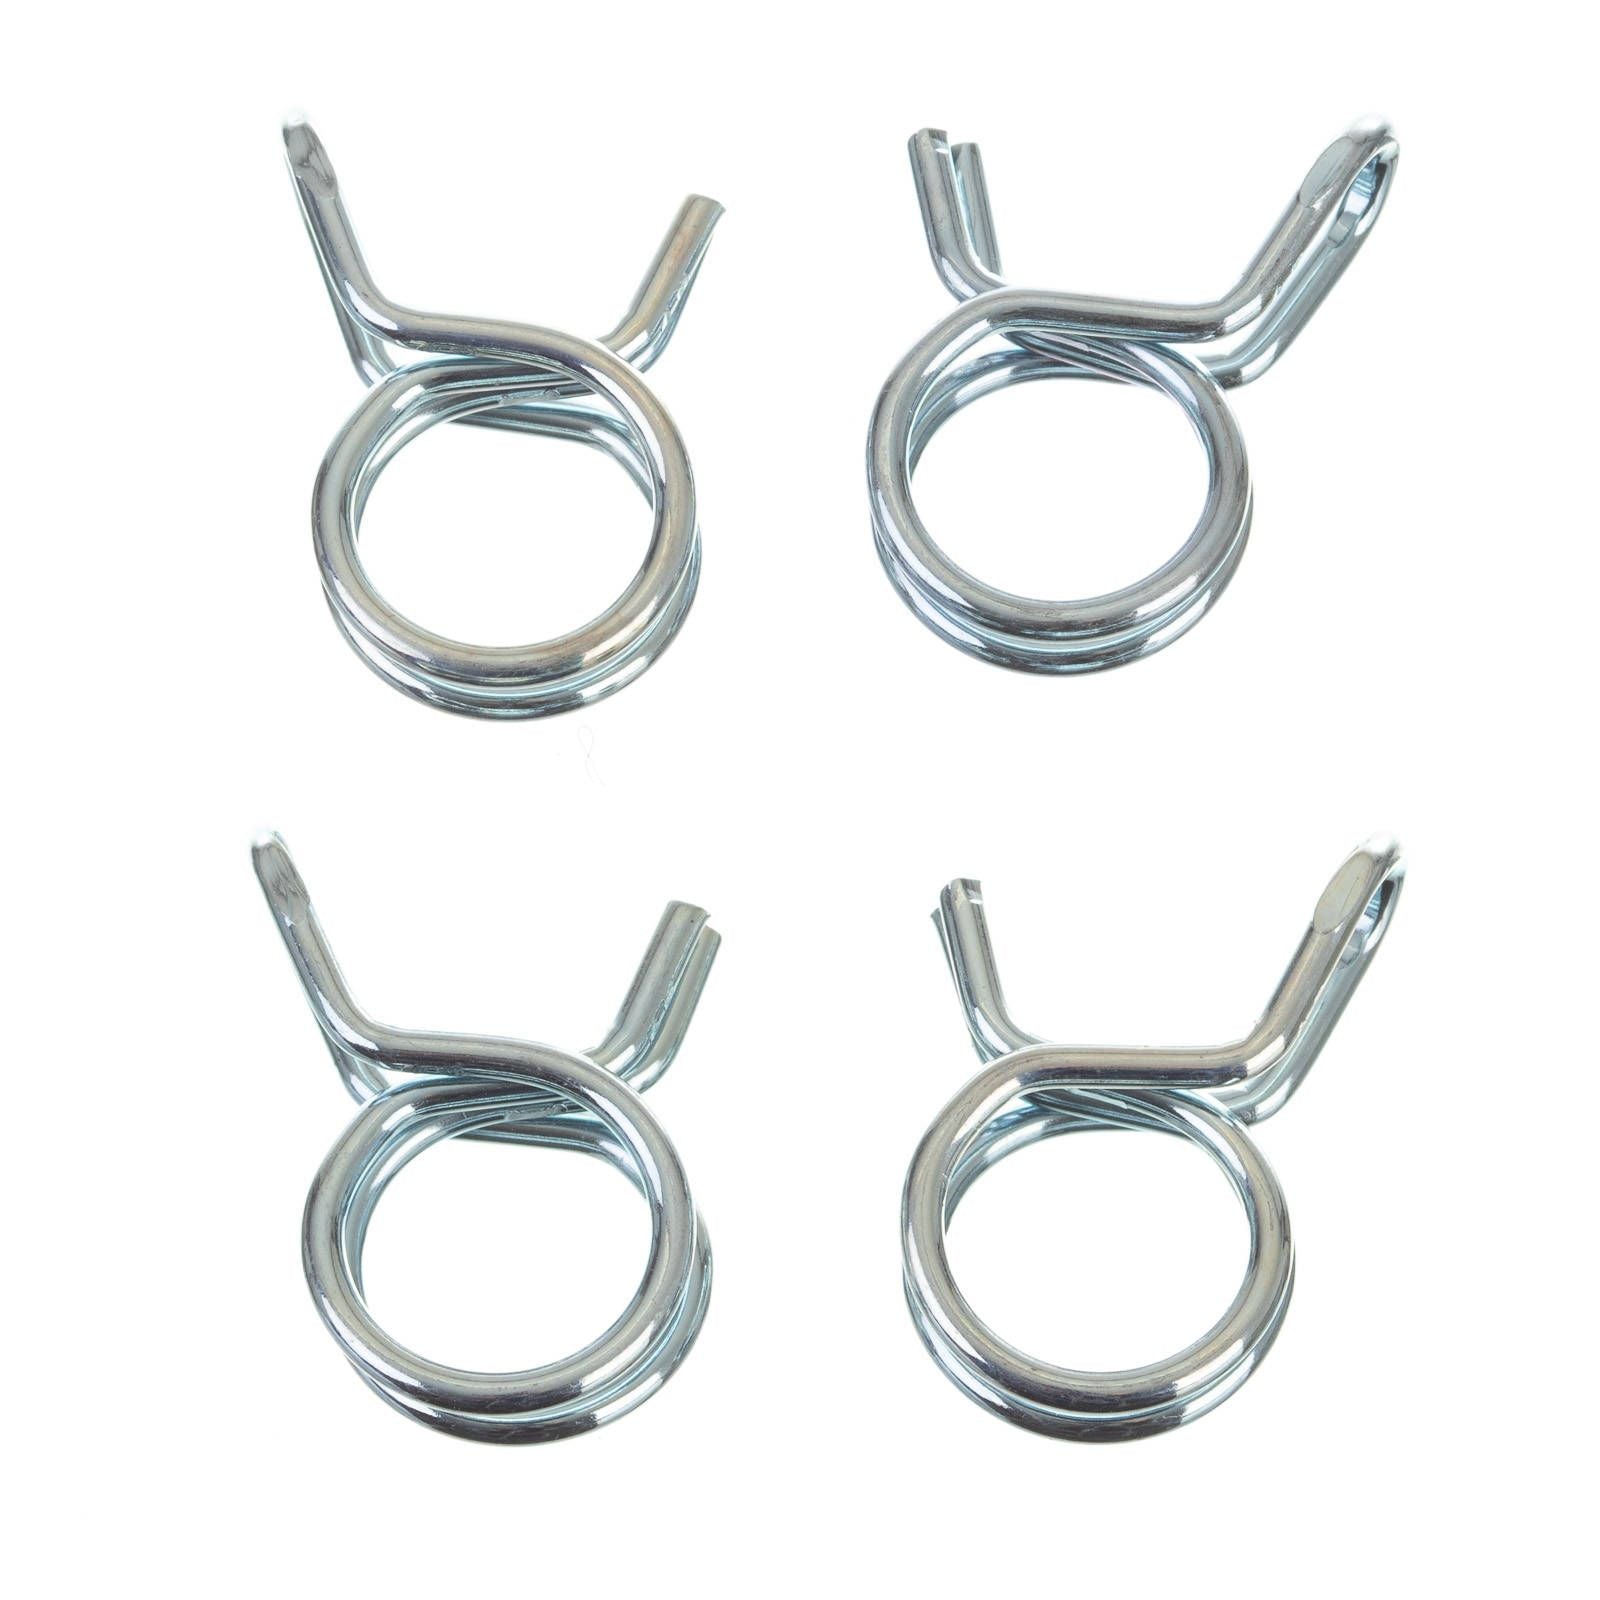 New ALL BALLS Racing Fuel Hose Clamp Kit - 10.1mm Wire (4 Pack) #ABFS00067